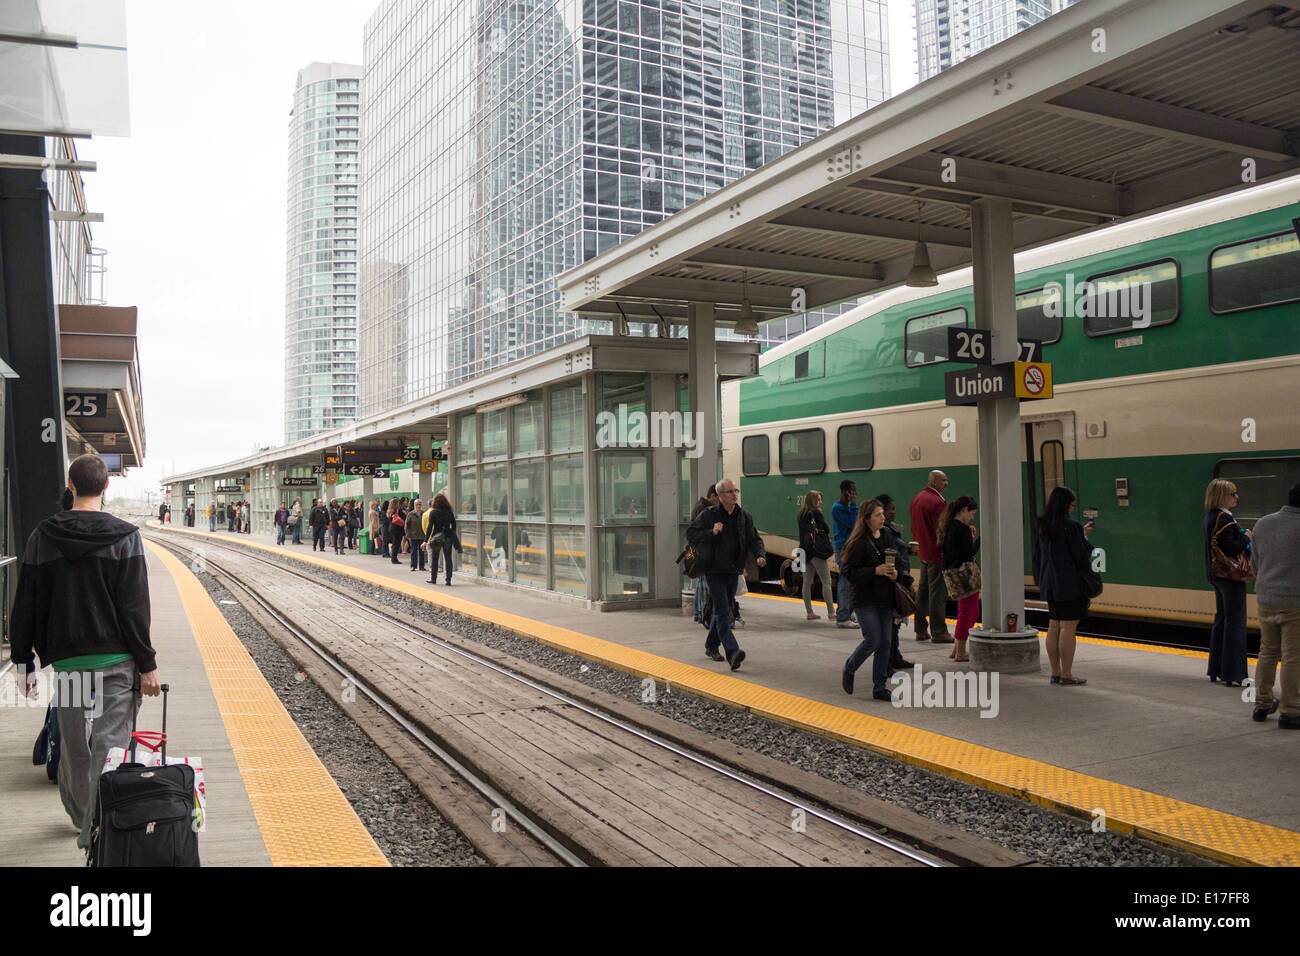 GO train at the platform at Toronto's Union Station where commuter passengers are waiting for trains. Stock Photo